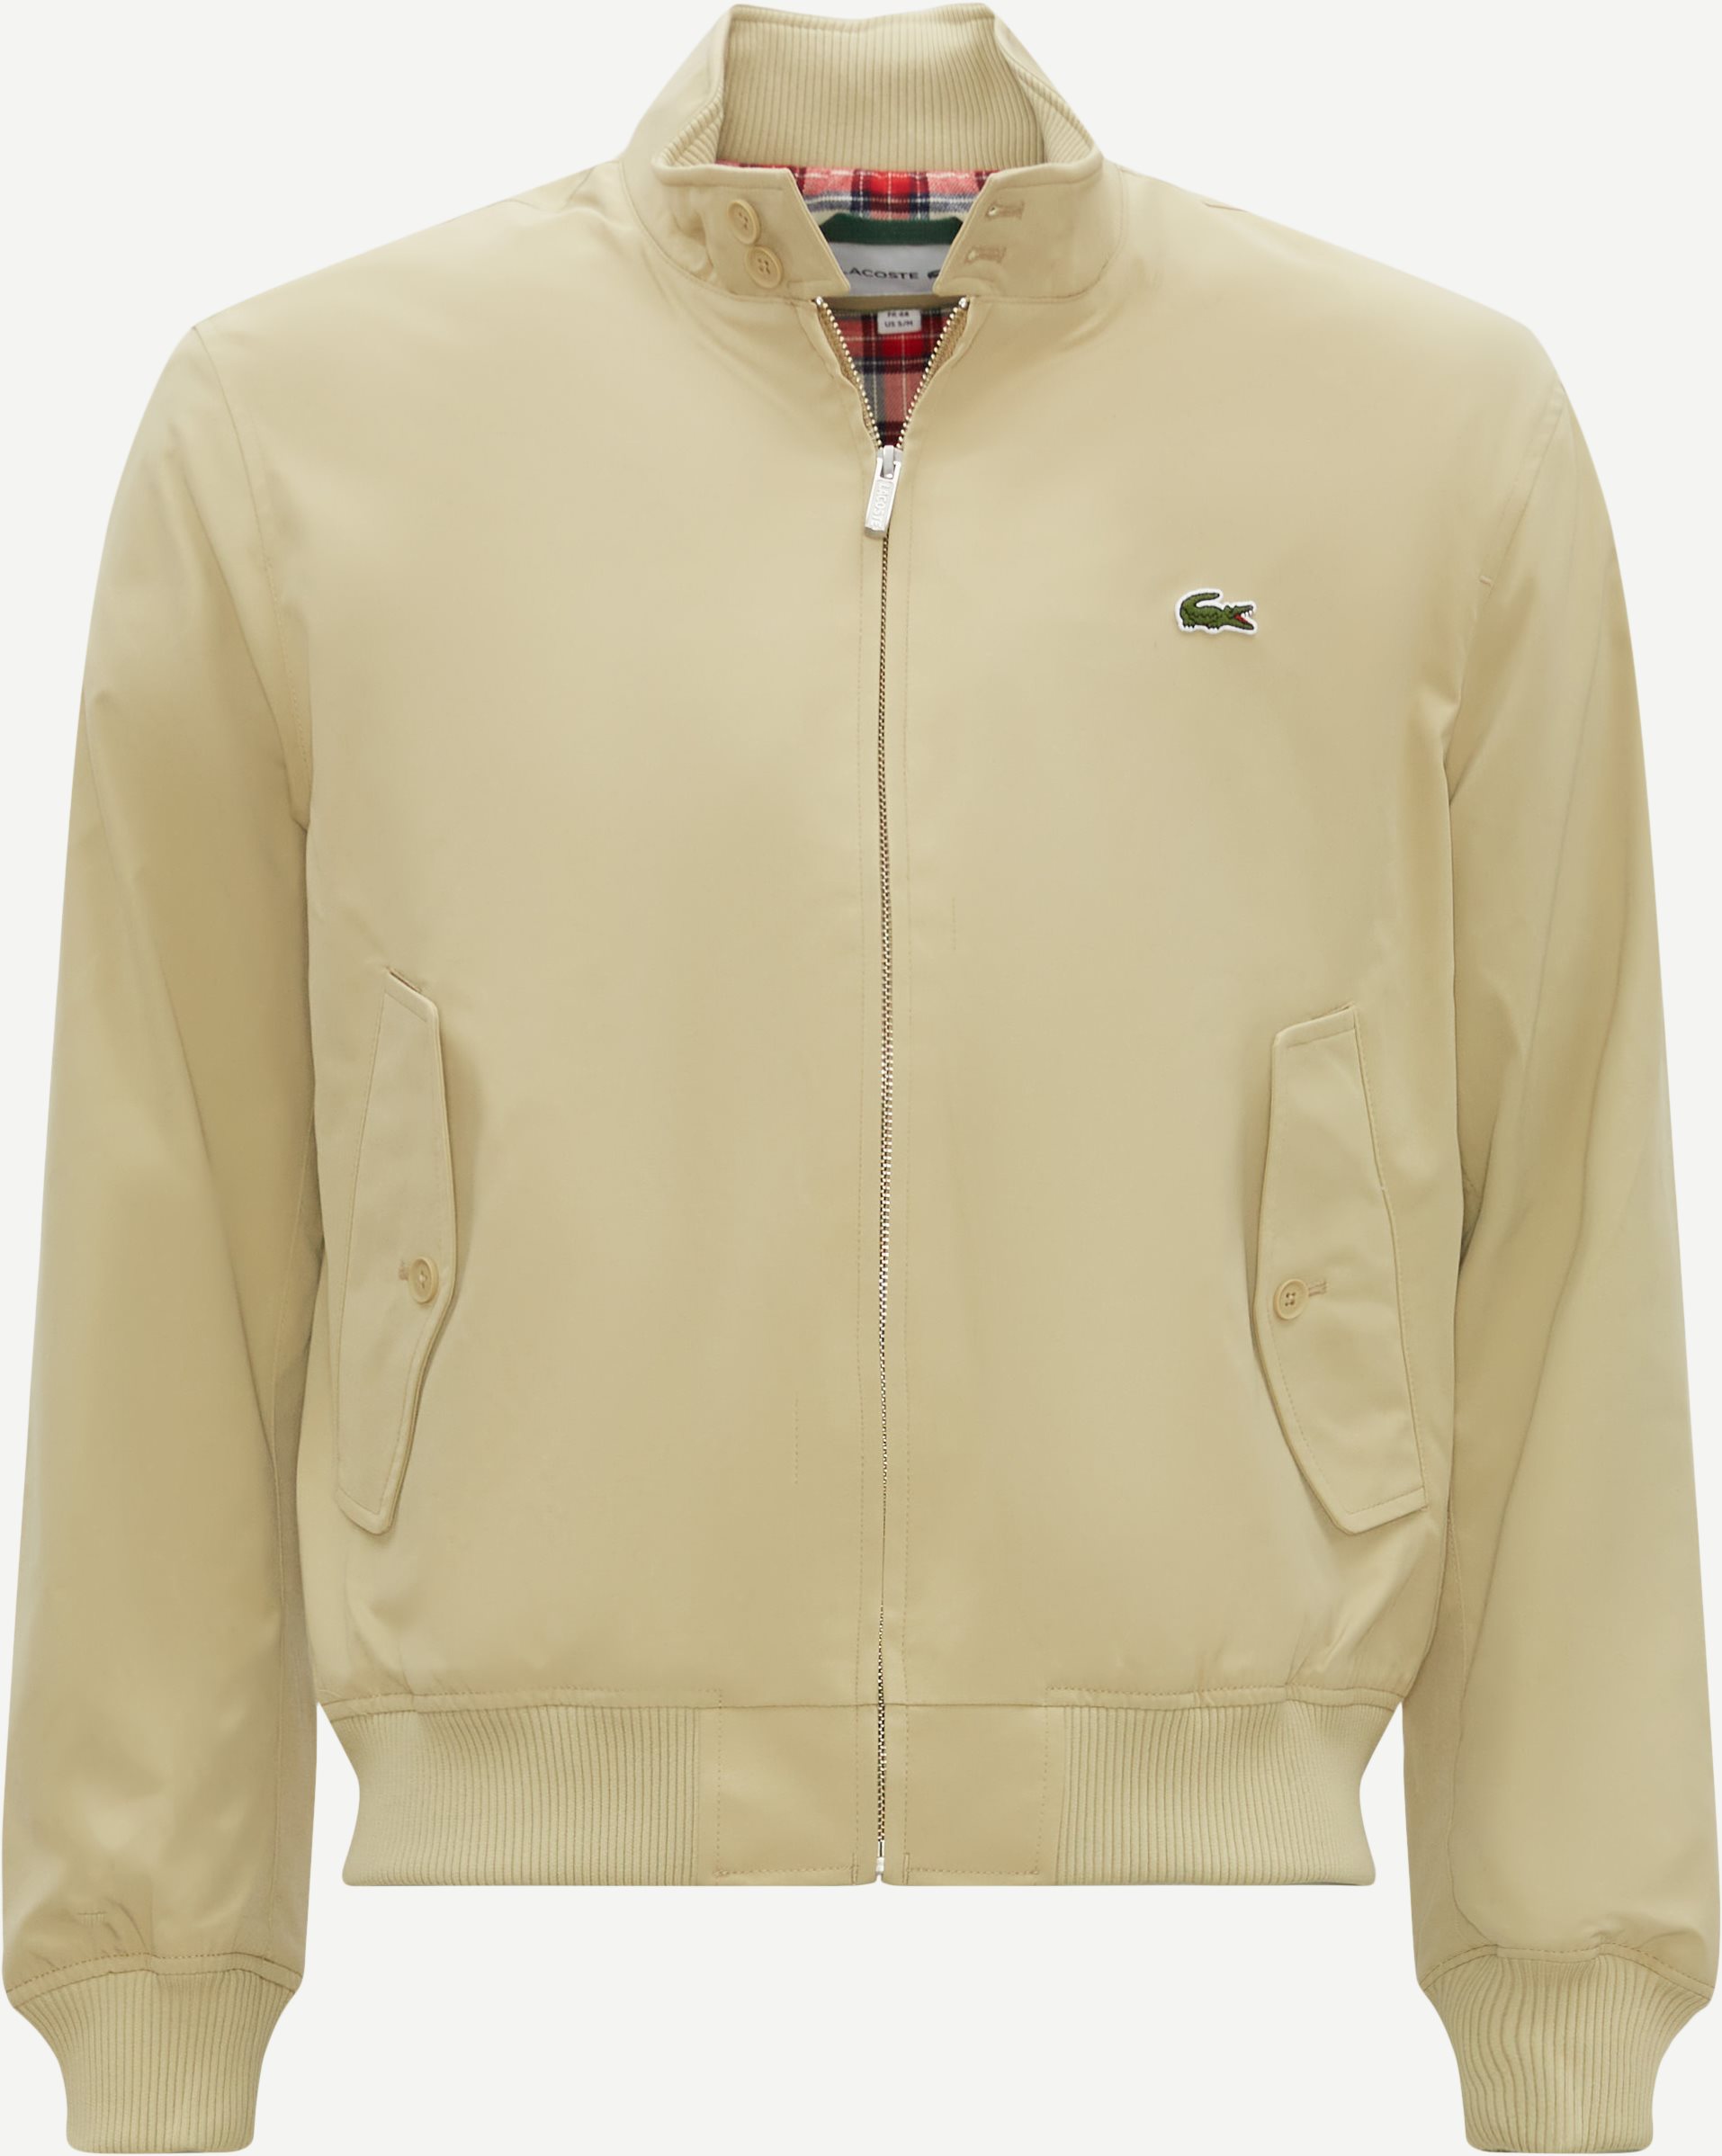 Lacoste Jackets BH0538 Sand